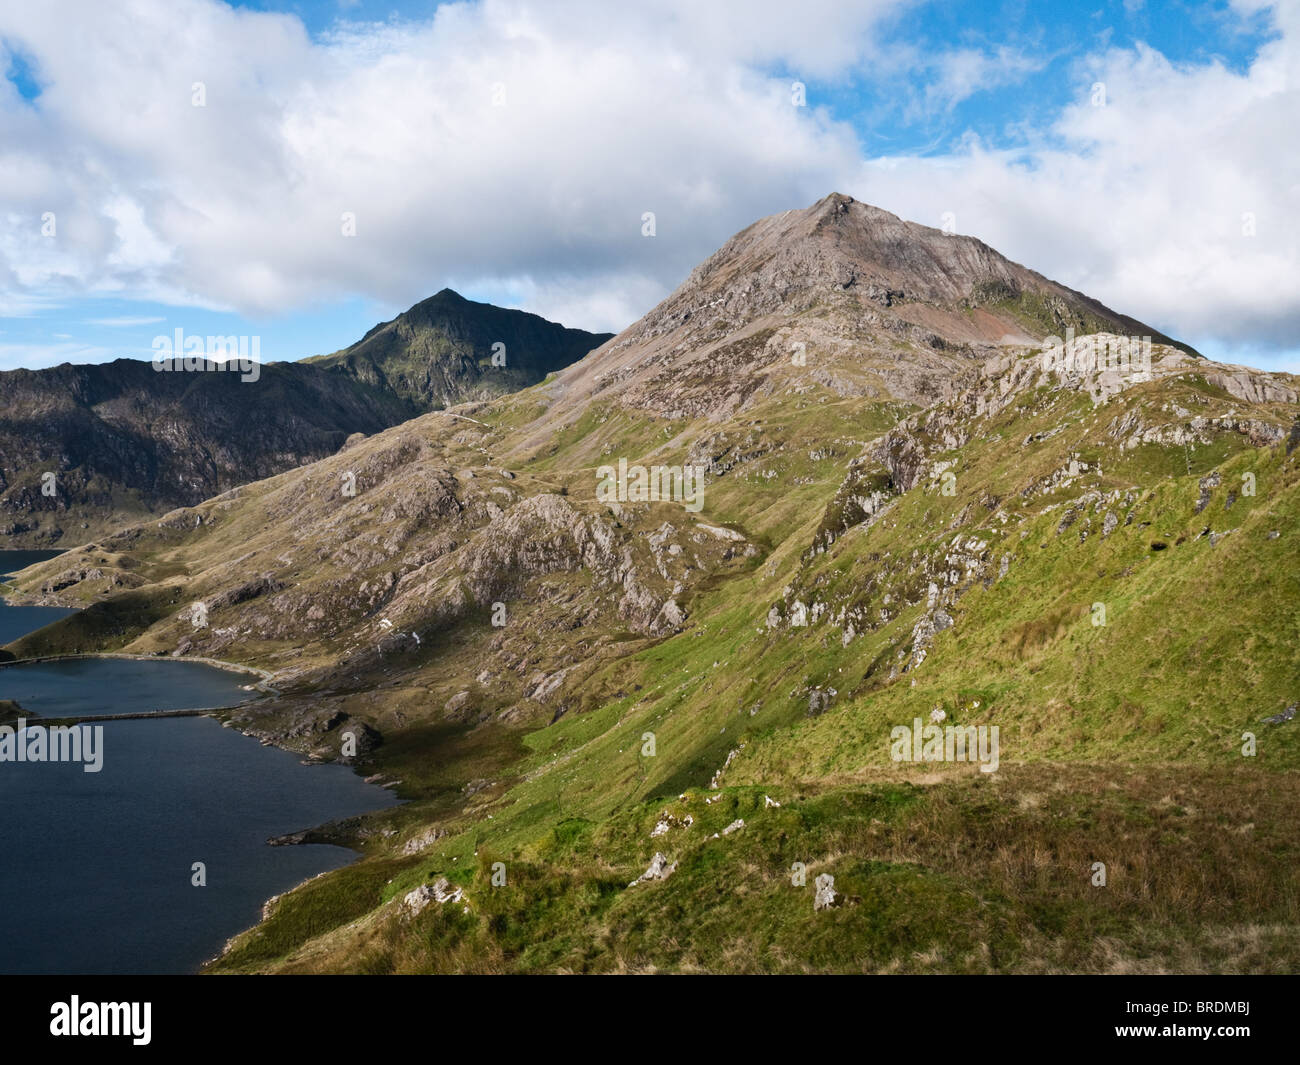 The shapely cone of Crib Goch rises above the lake of Llyn Llydaw, with Yr Wyddfa, the summit of Snowdon, in view behind. Stock Photo